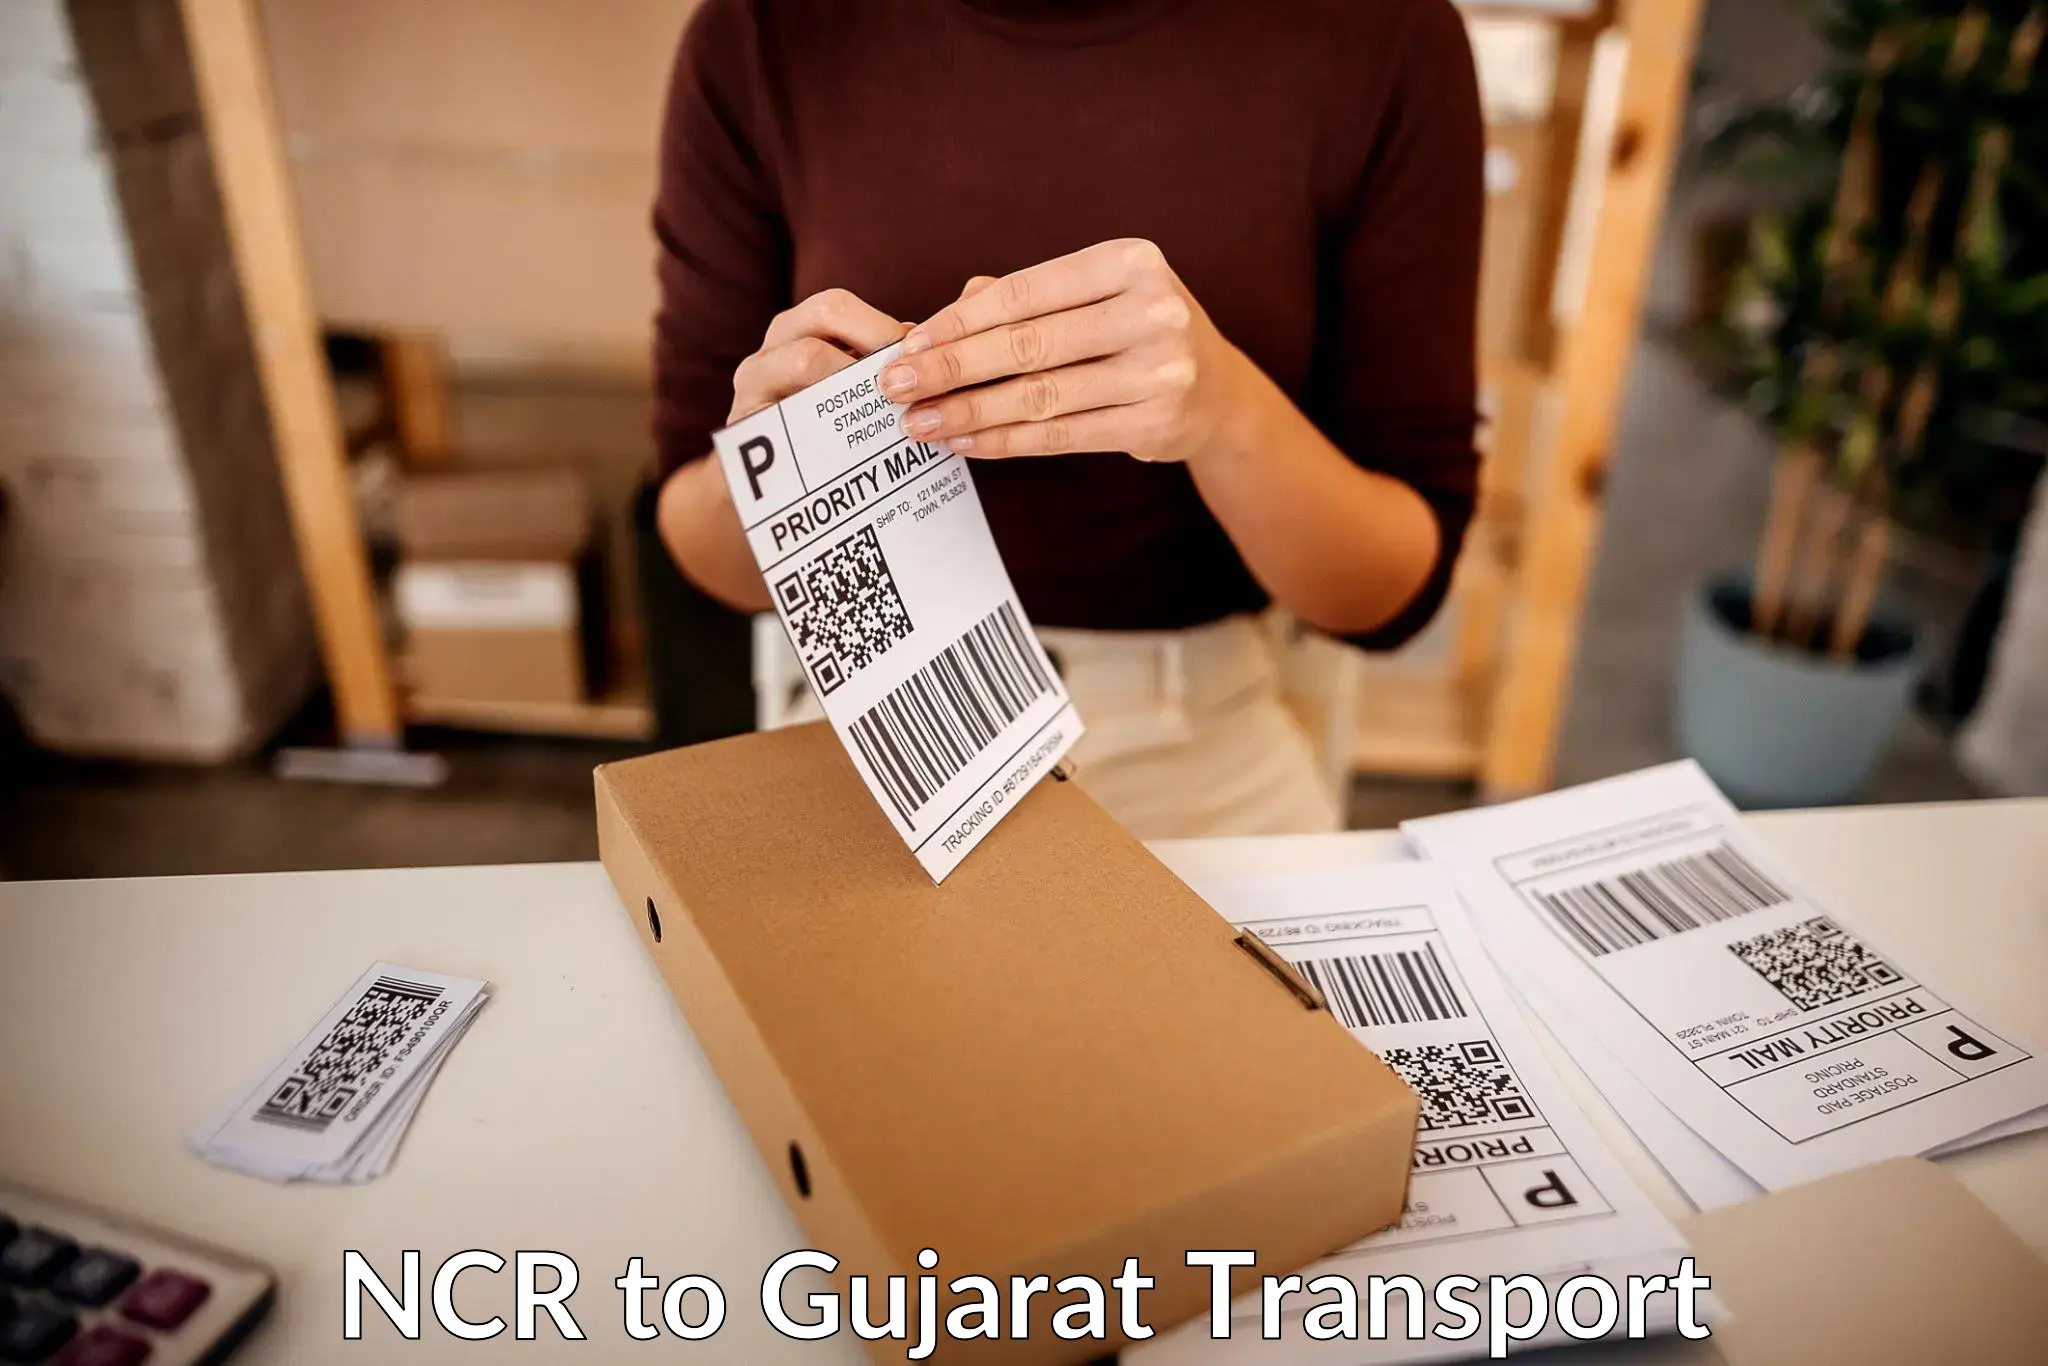 Package delivery services NCR to Mehsana